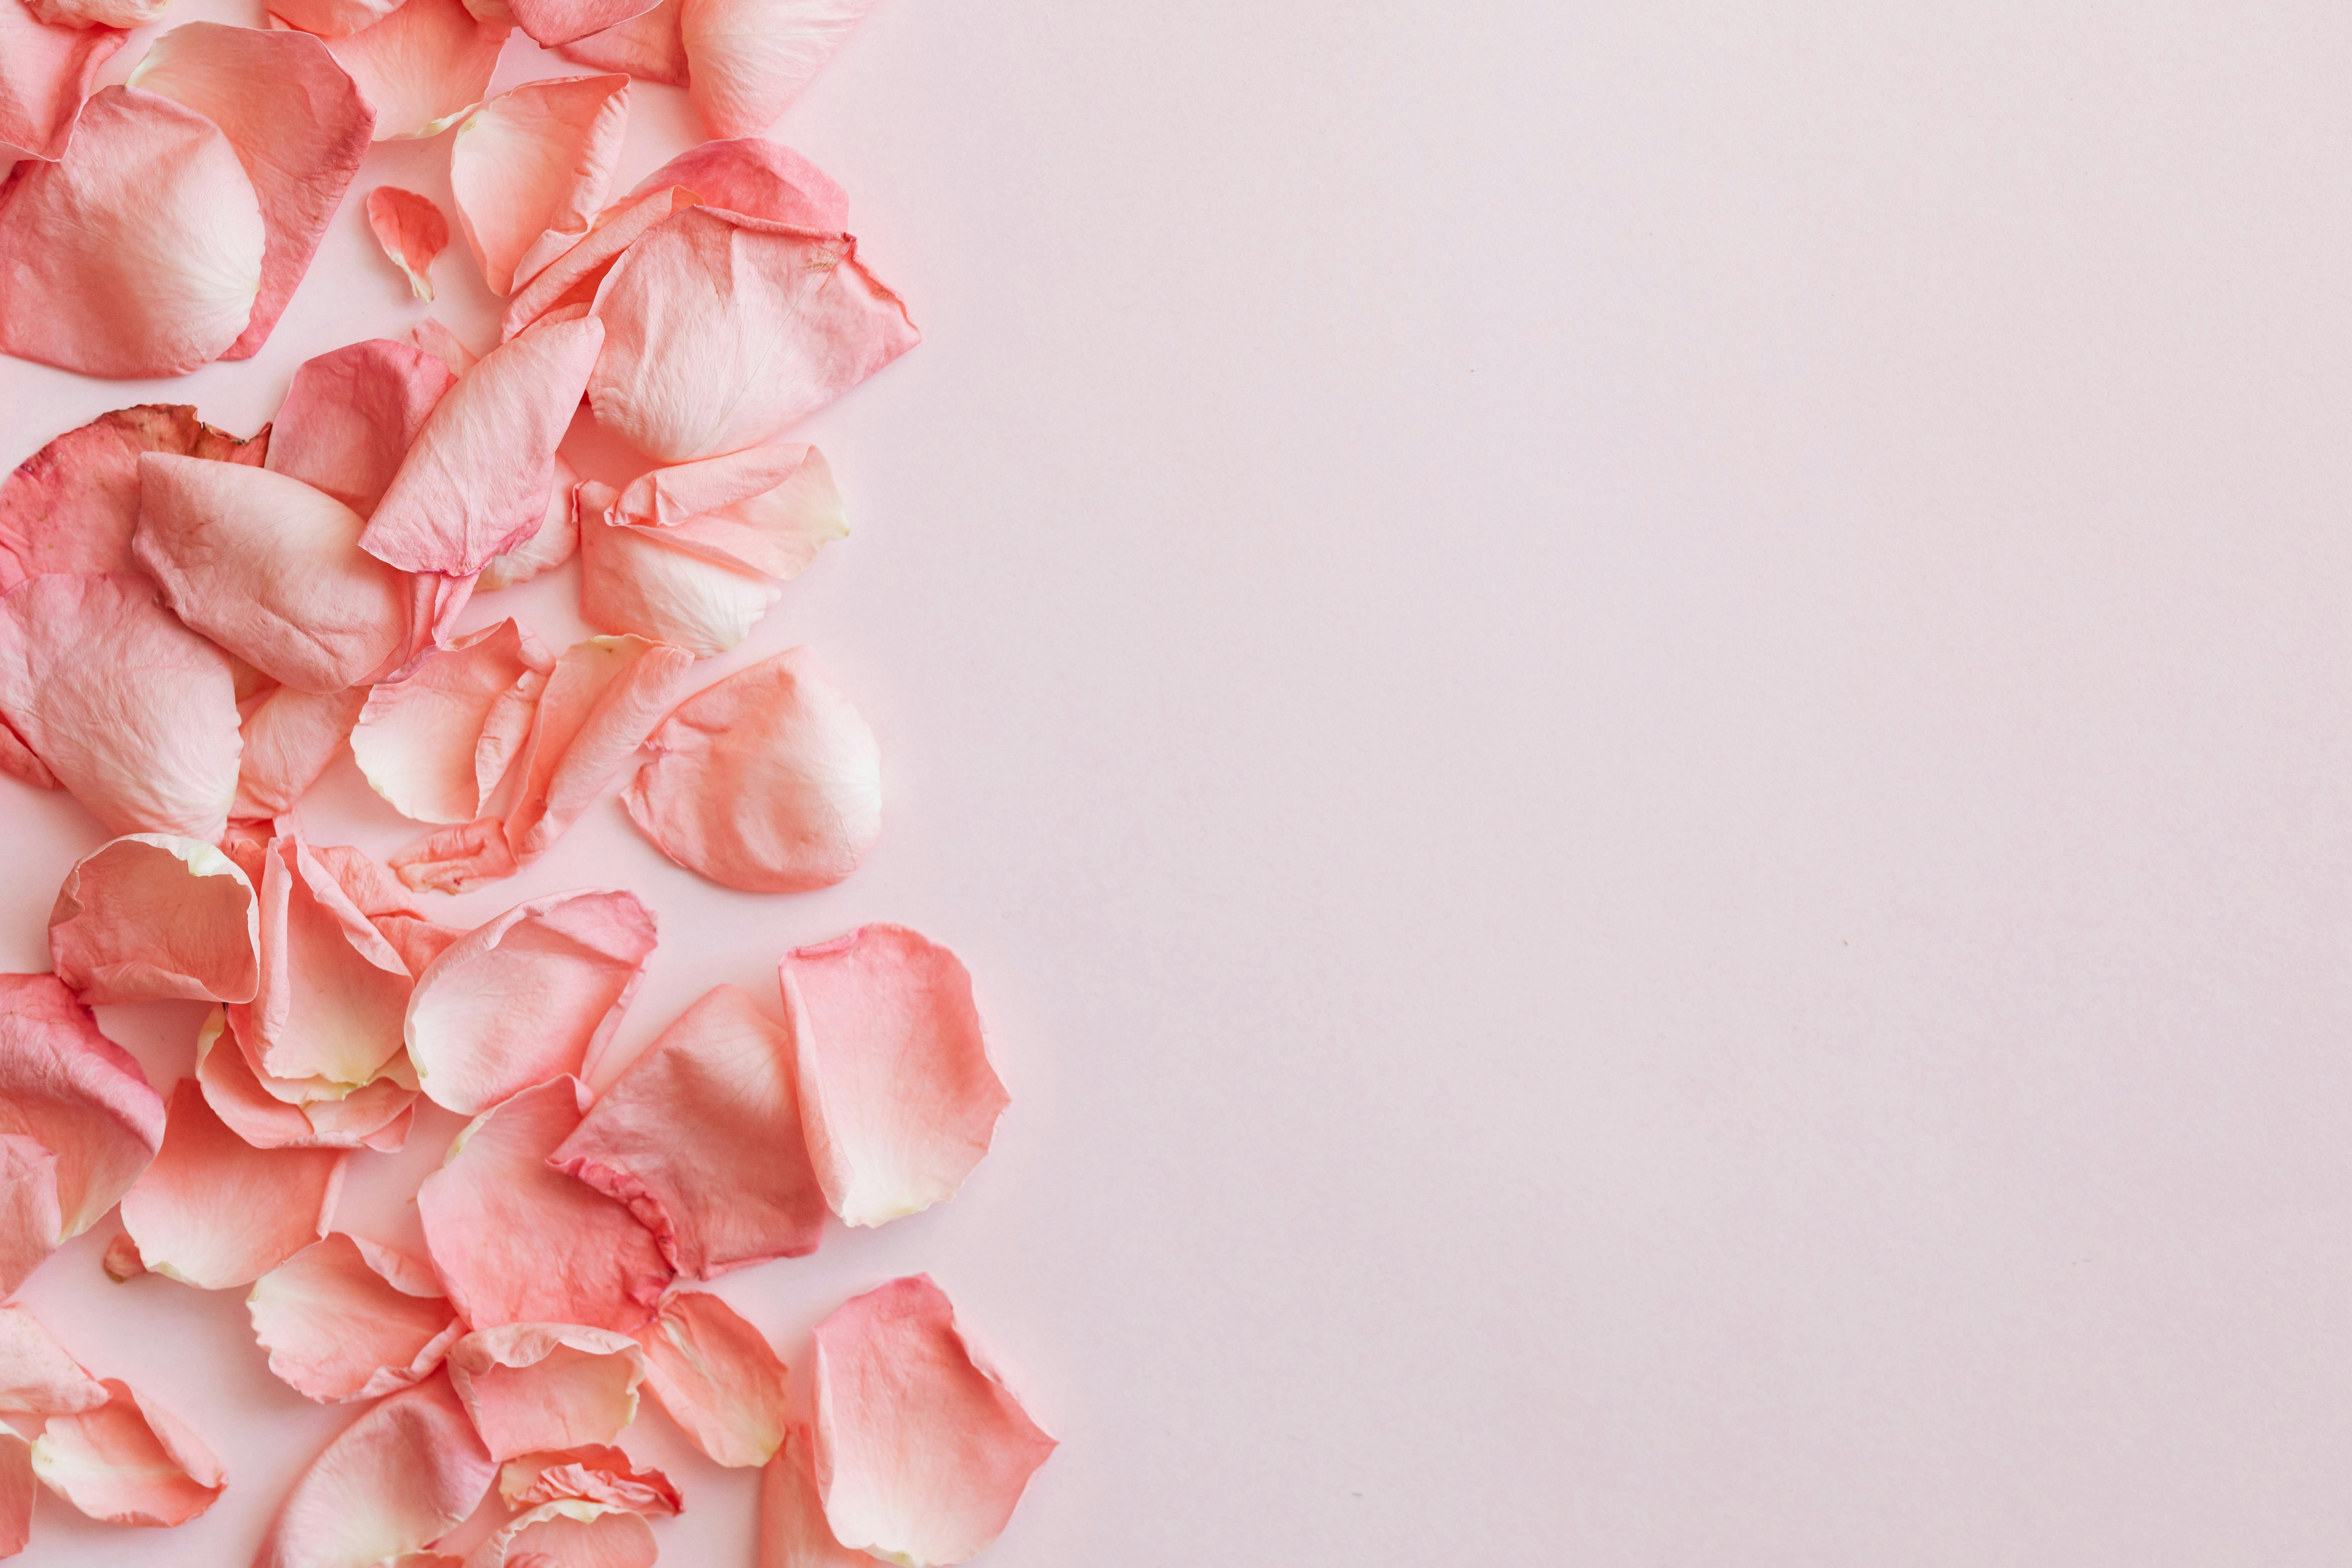 Bunch Of Pink Rose Petals On Pink Surface · Free Stock Photo